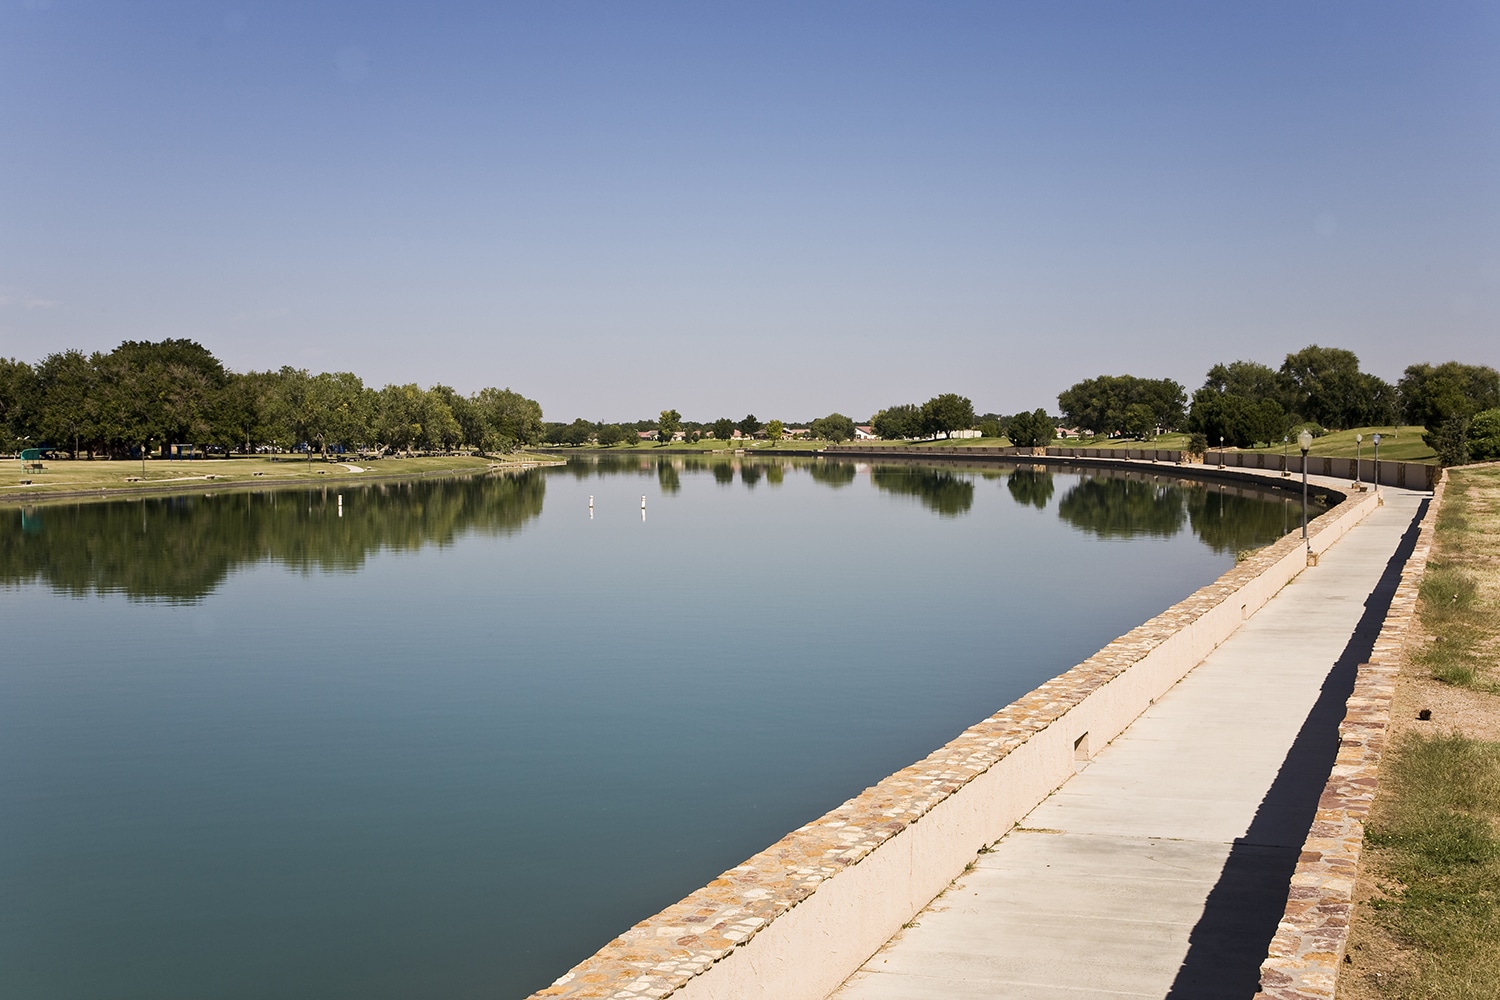 Image of a long, thin lake bordered by concrete embankments.